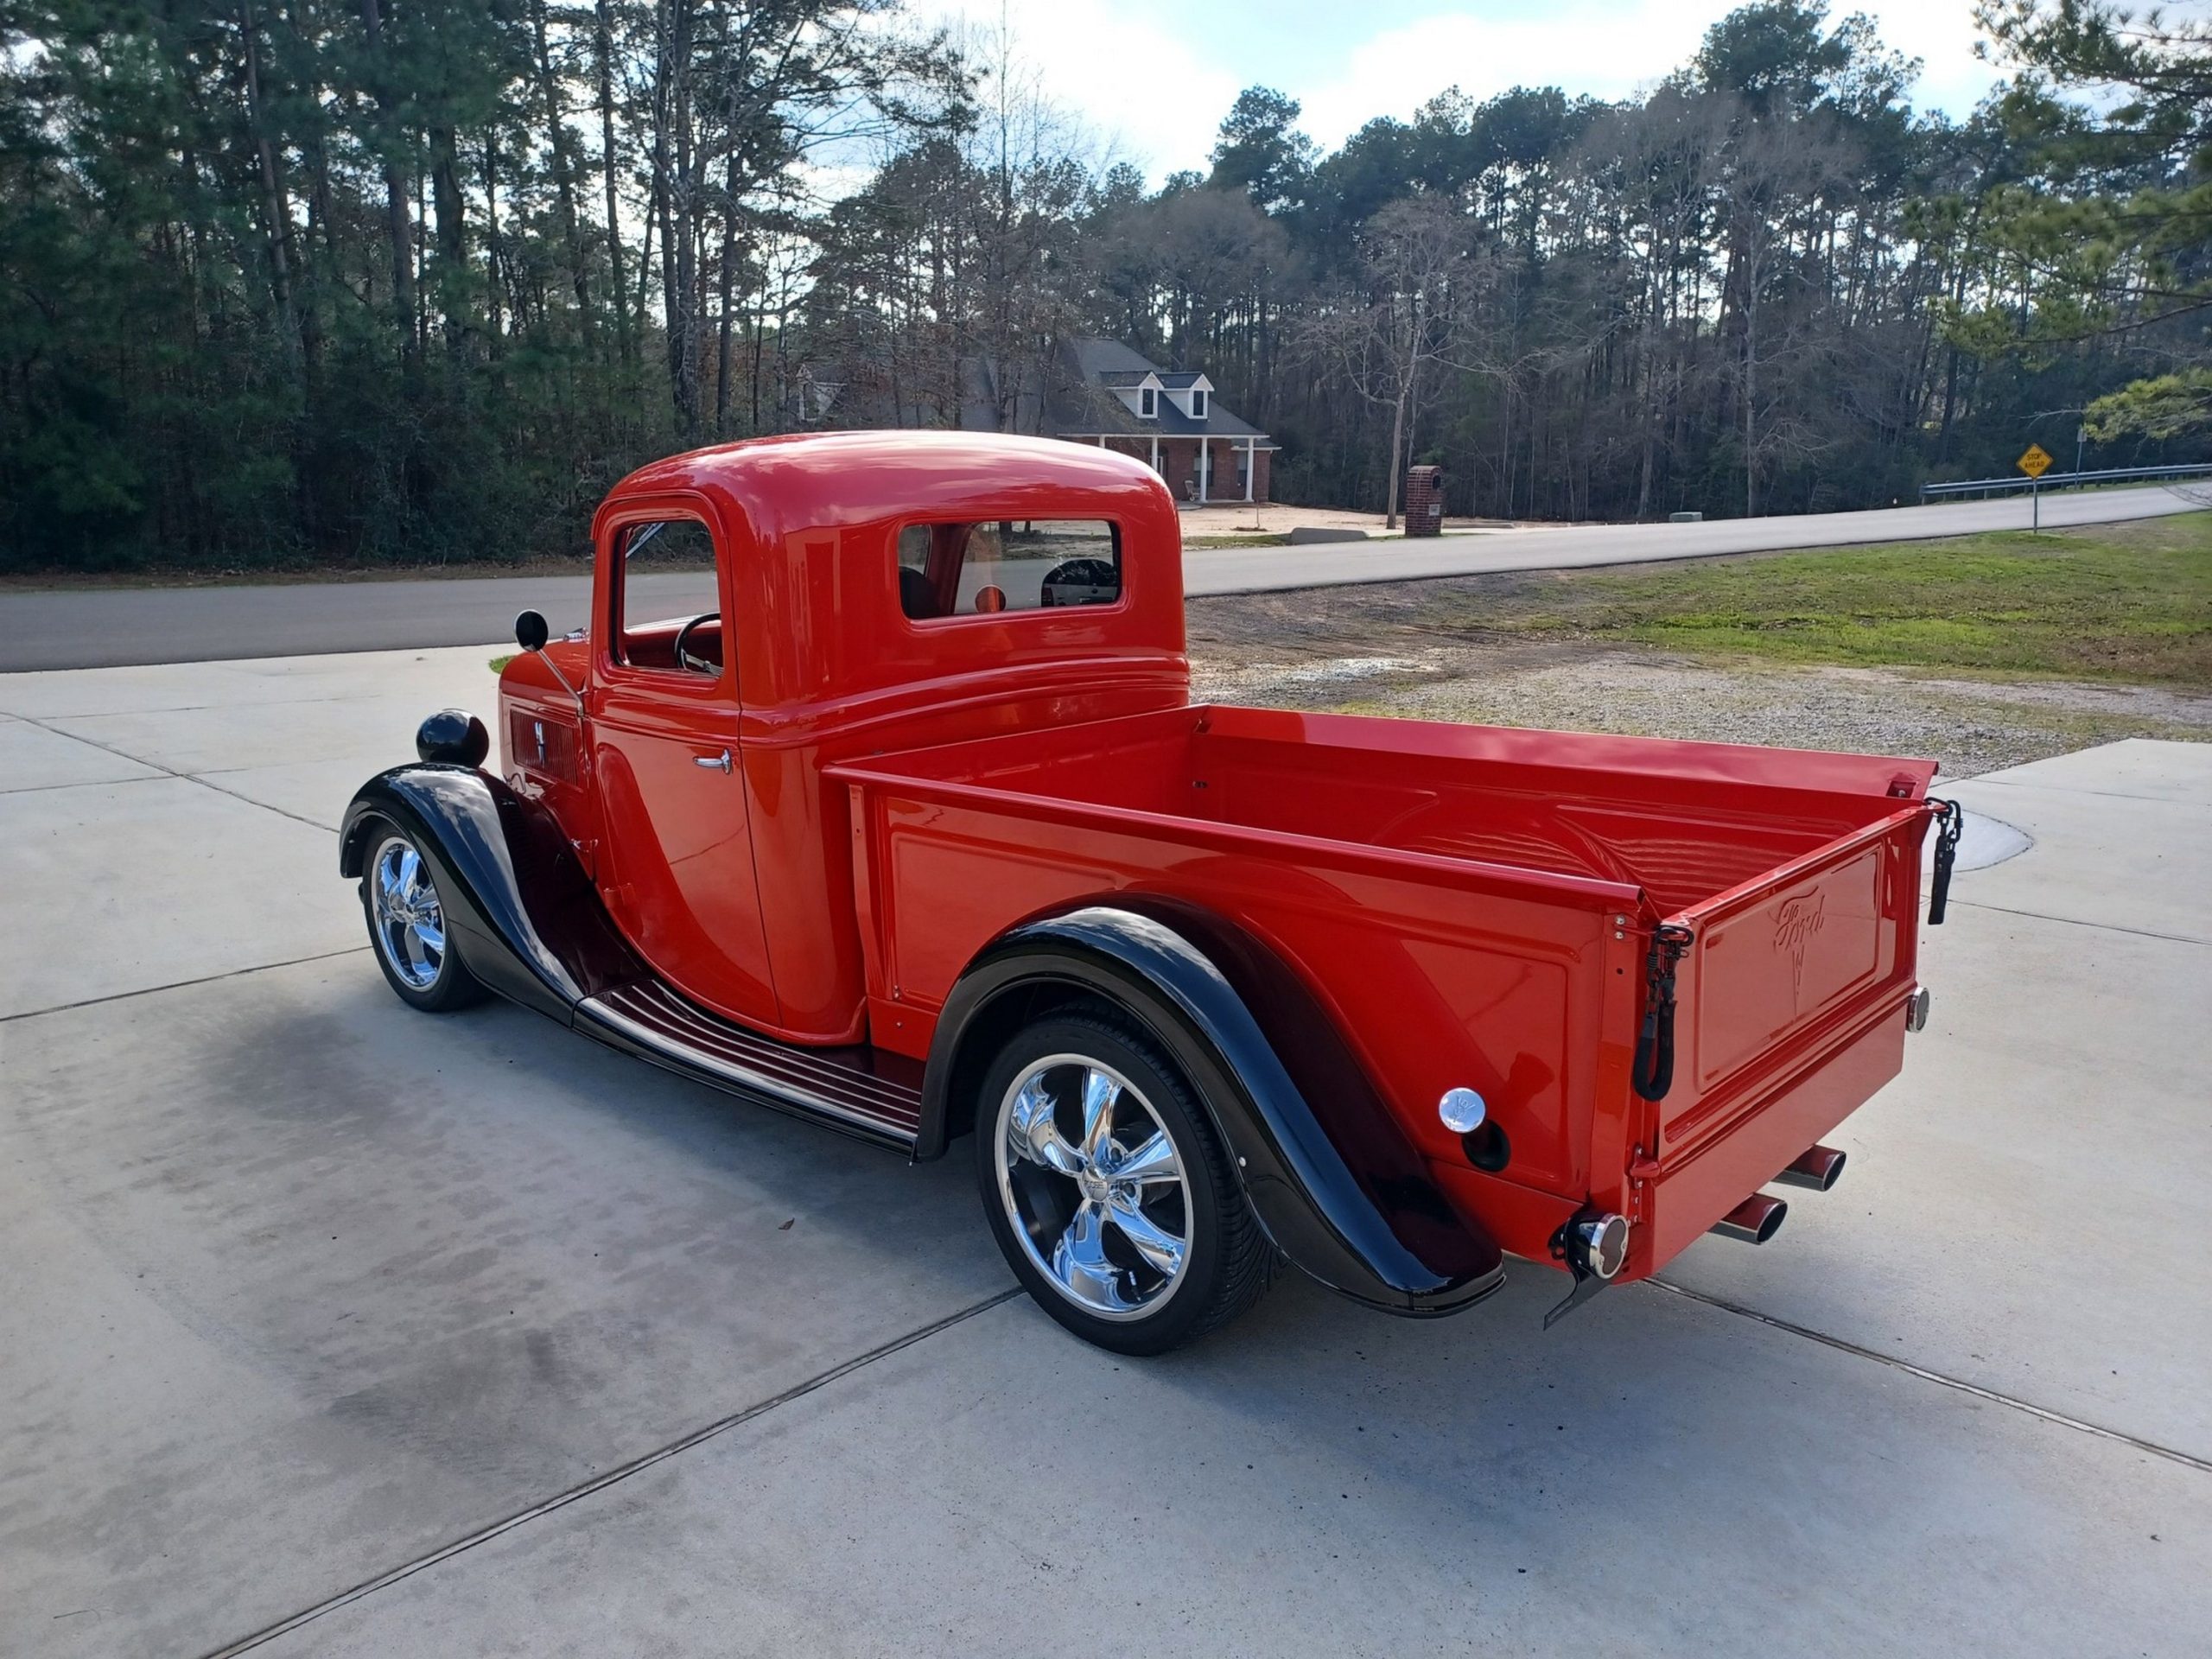 1937 Ford Truck with Japanese Power